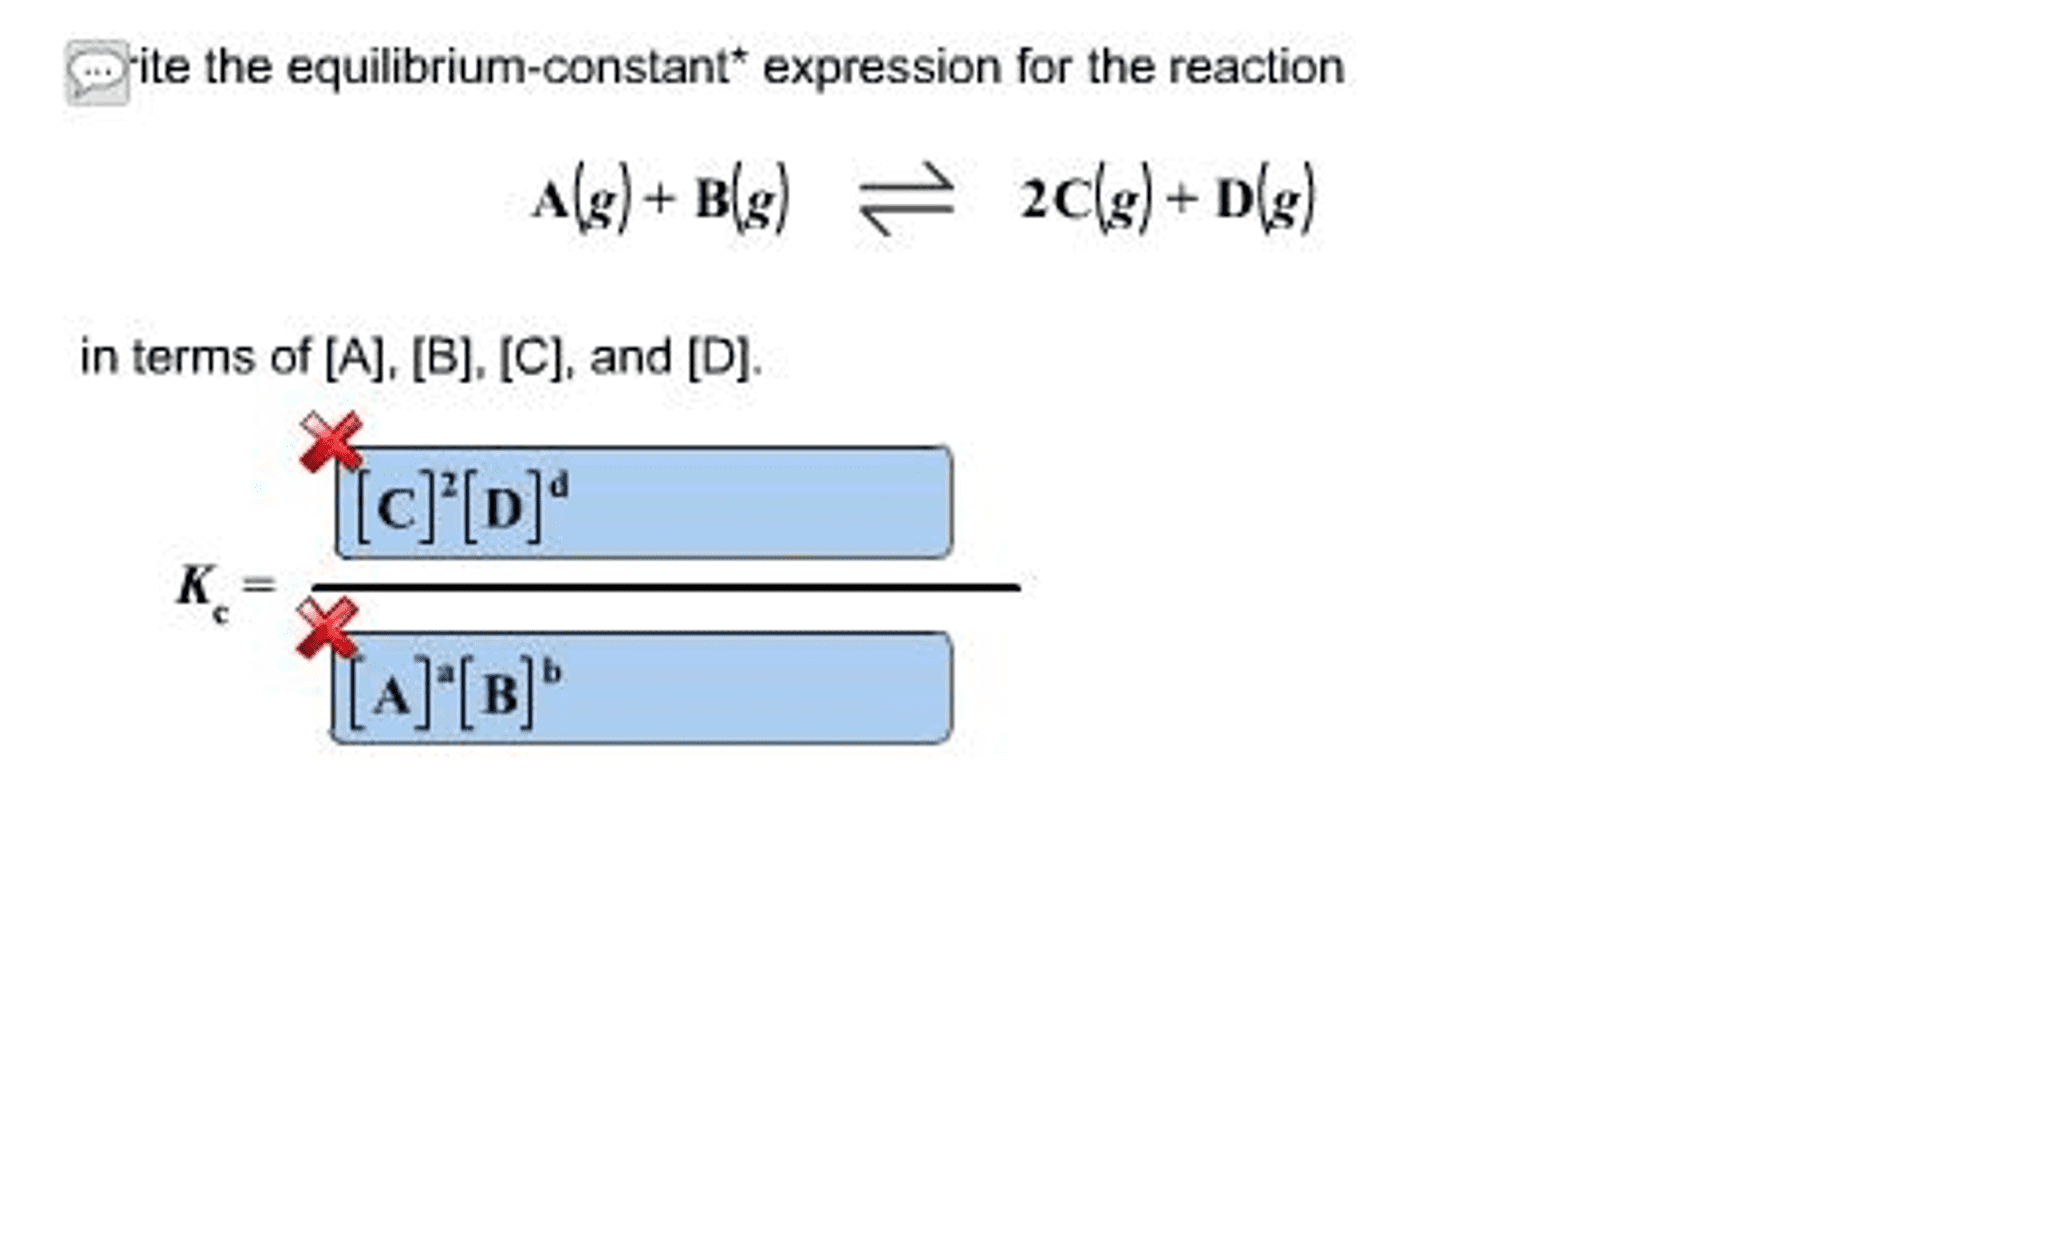 OneClass: Write the equilibrium-constant* expression for the